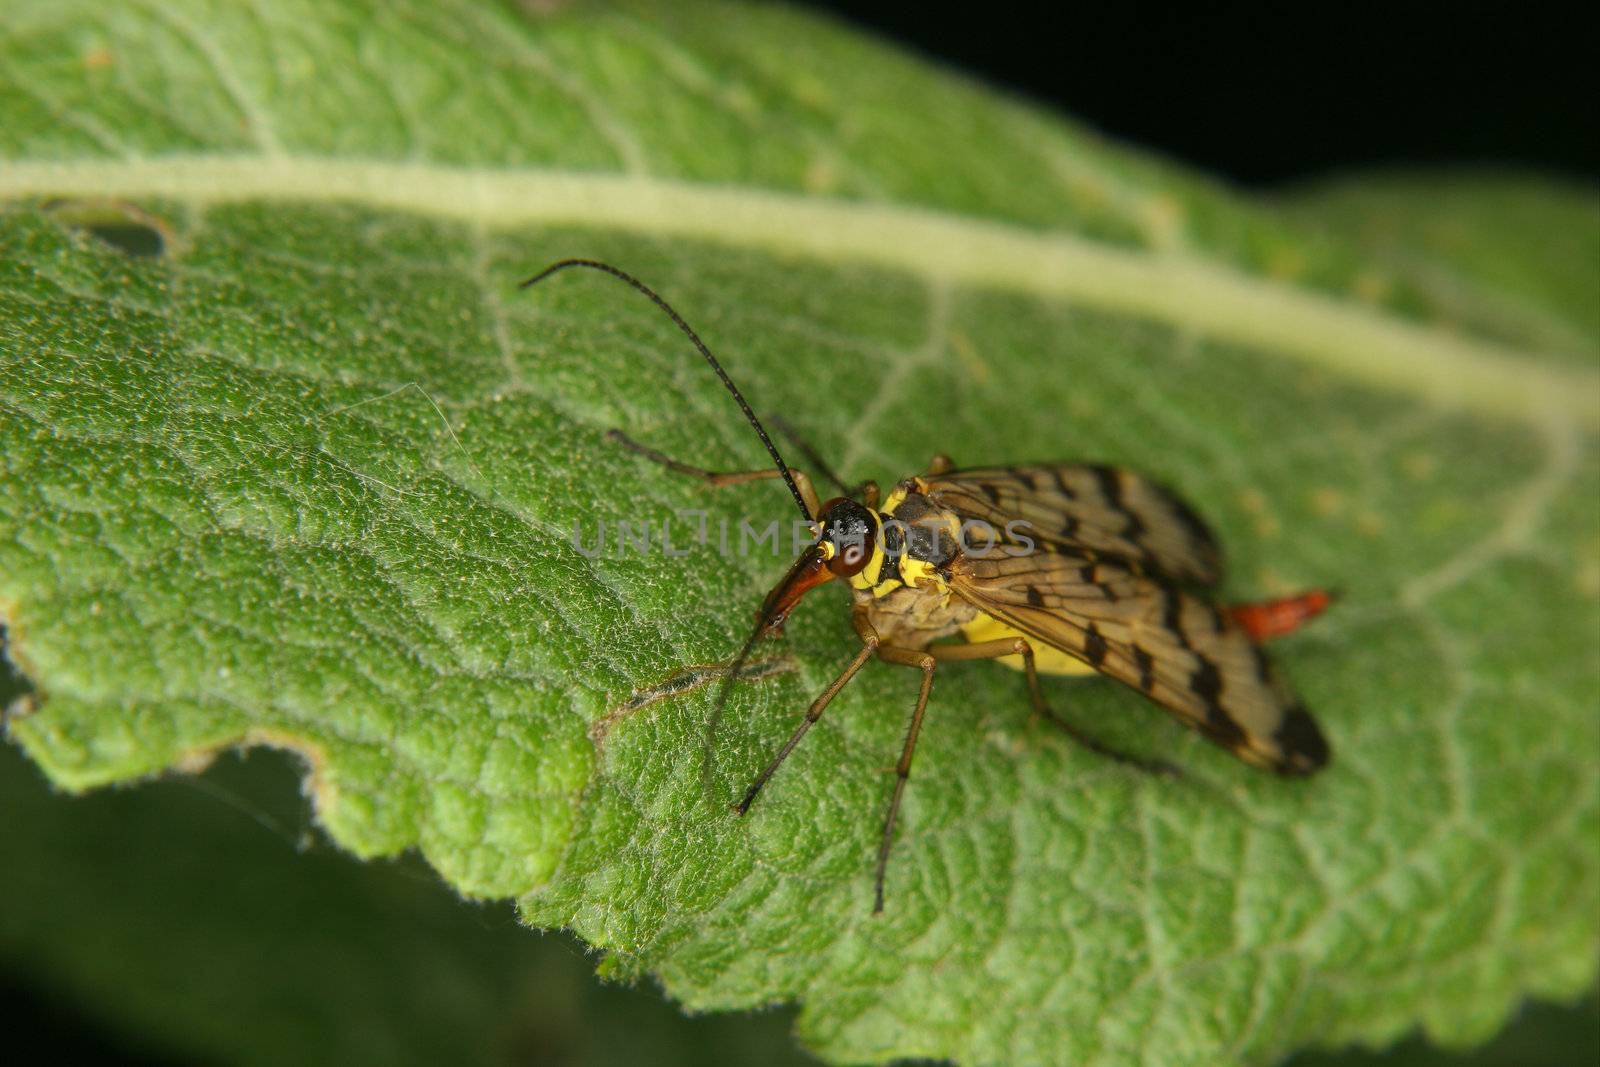 Common Scorpionfly (Panorpa communis) by tdietrich